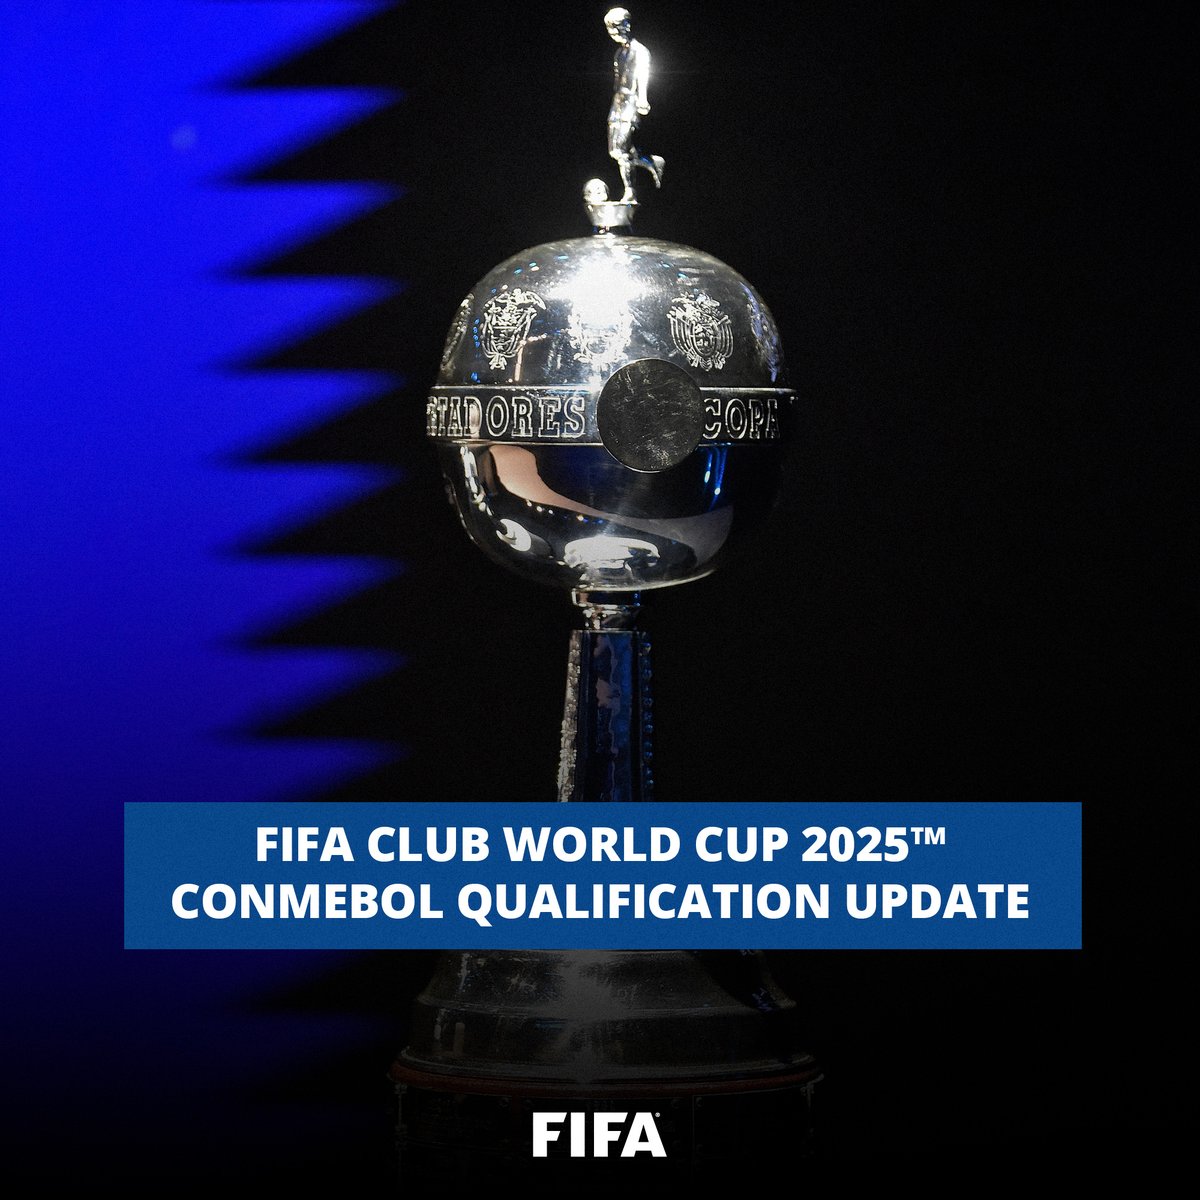 The race to qualify for the FIFA Club World Cup 2025 ramps up in South America this week, as the @CONMEBOL @Libertadores group stage resumes. Find out who could qualify this week…